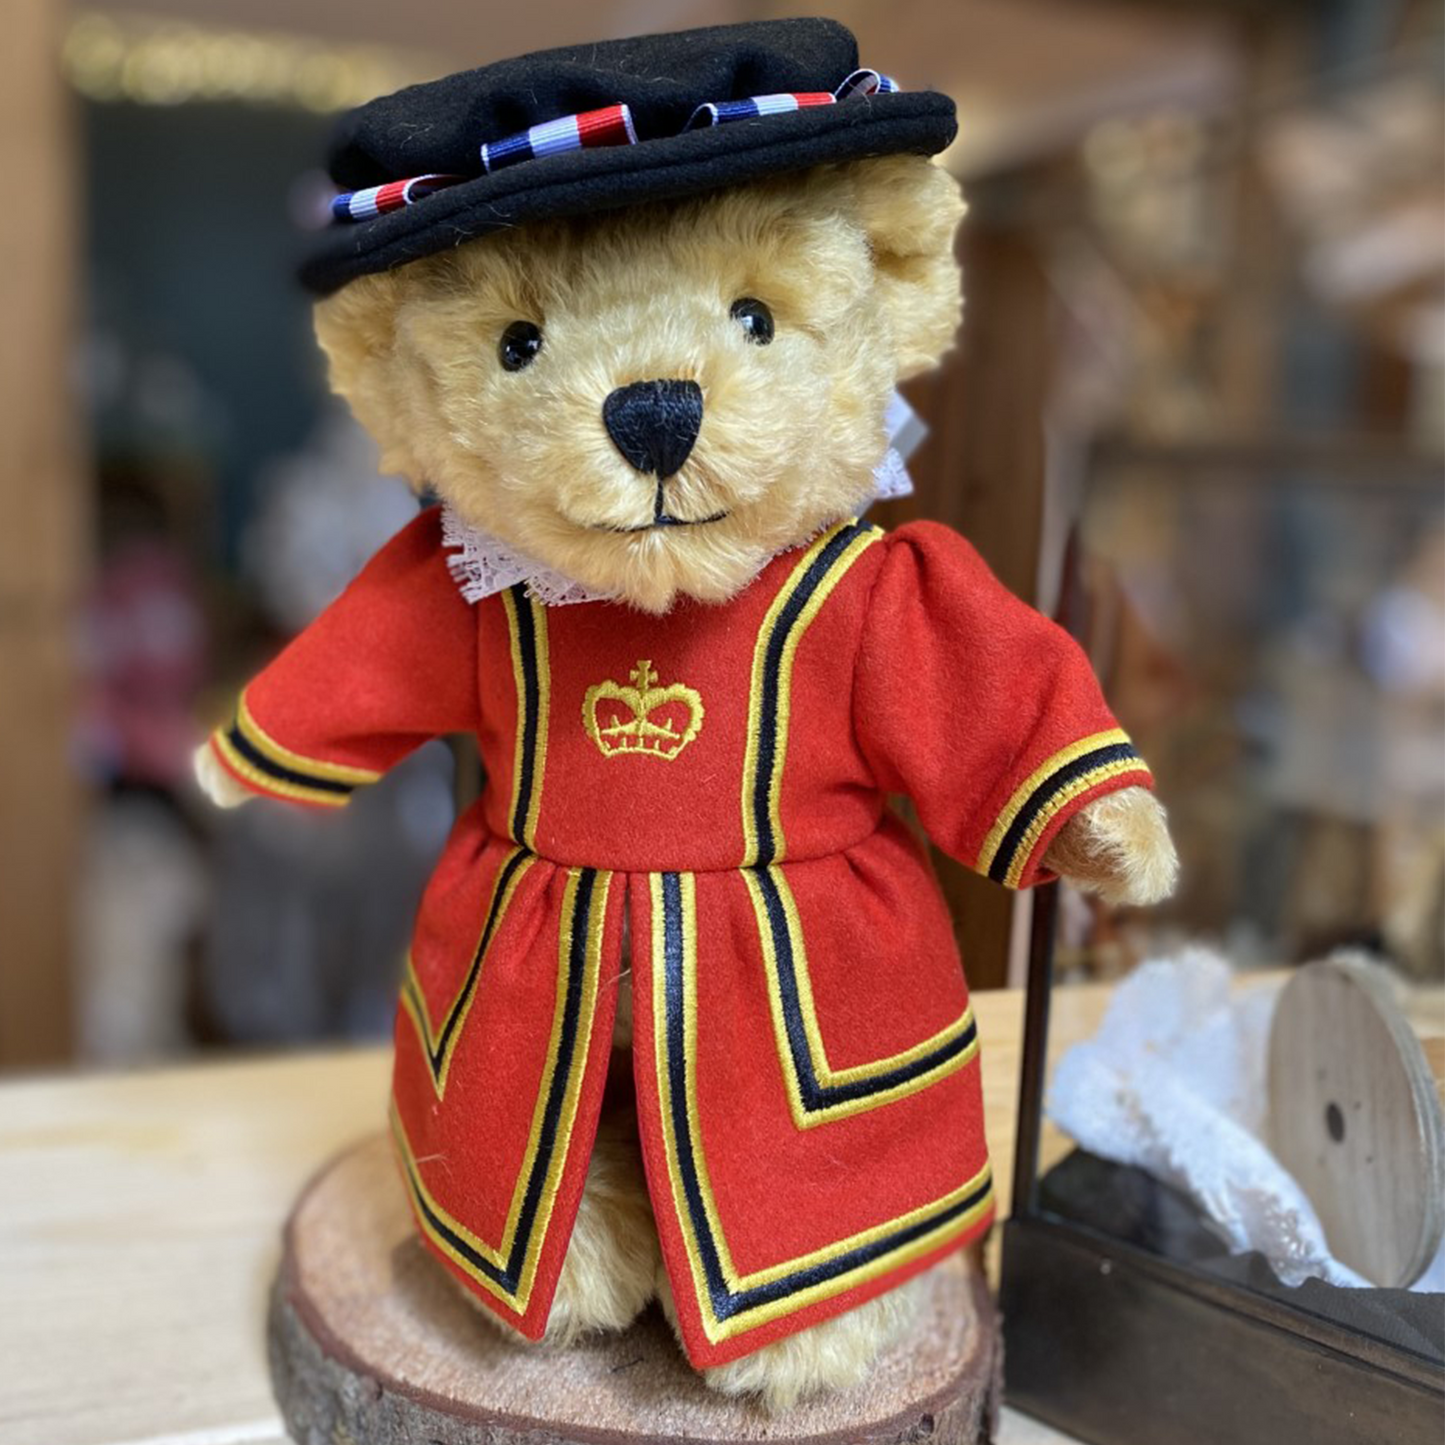 This iconic British character teddy bear is dressed in a beautifully made, authentic Beefeater outfit. Based on the state dress of a real Tower of London guard, complete with Tudor hat, the clothing is fully removable, allowing the bear to be enjoyed in all his finery or simply as a stunning classic Merrythought soft toy.